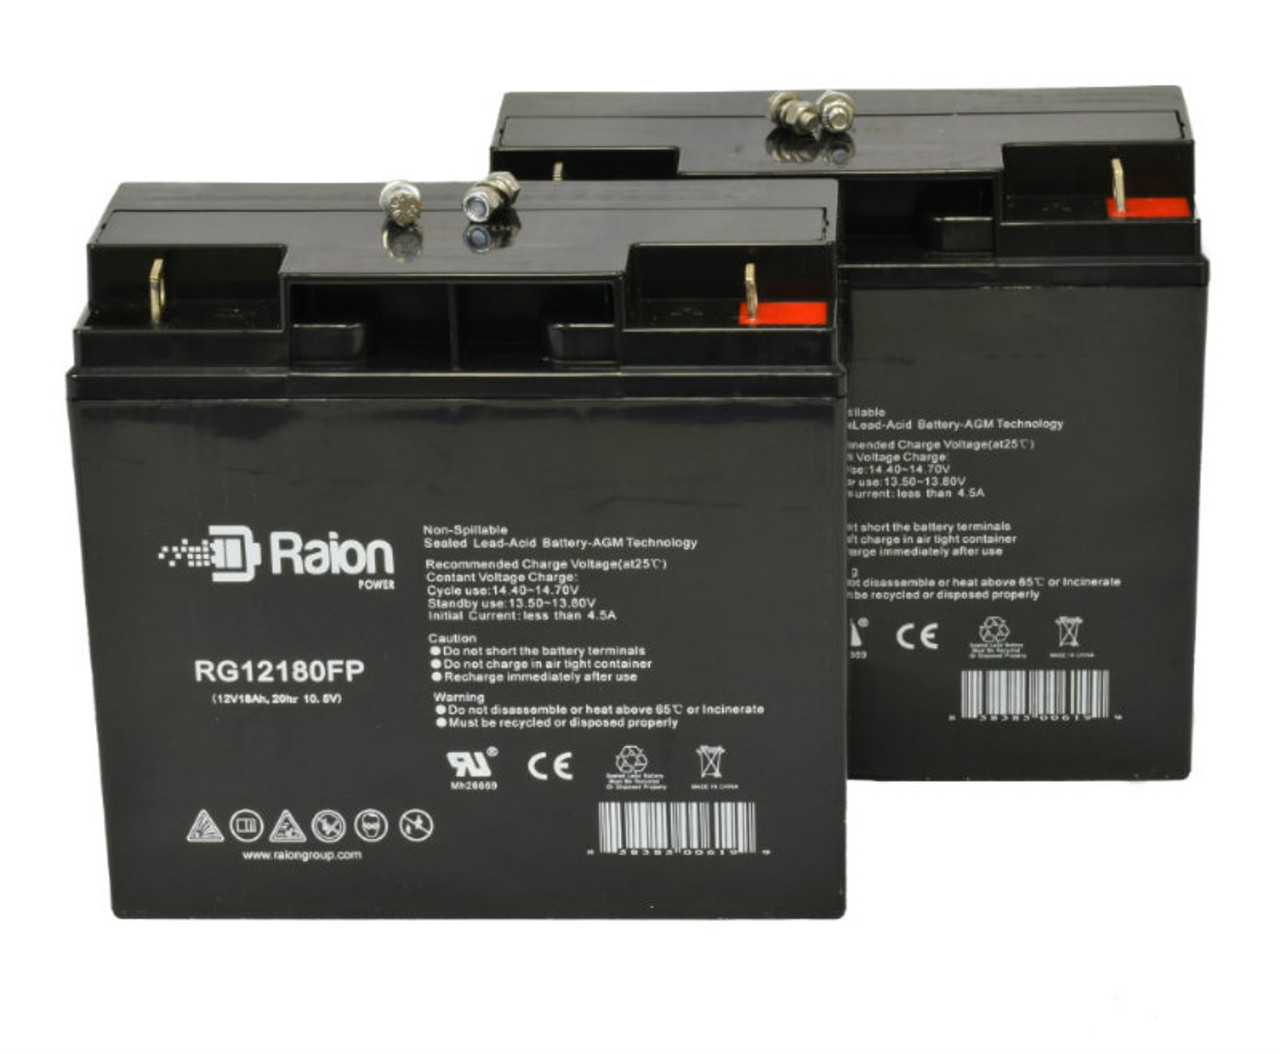 Raion Power Replacement RG12180FP 12V 18Ah Emergency Light Battery for Hubbell 12-582 - 2 Pack